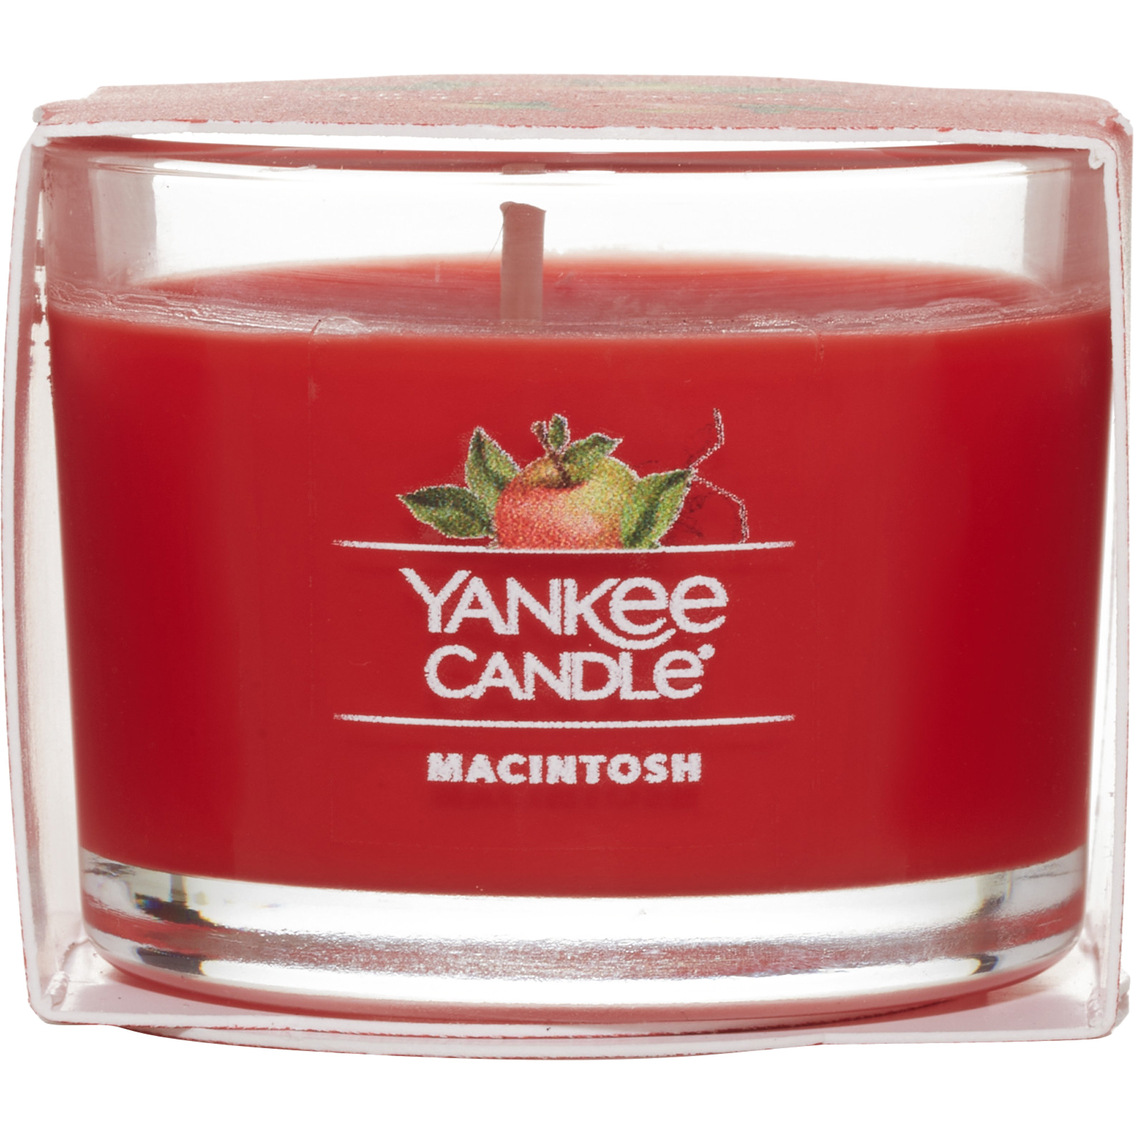 Yankee Candle Macintosh Night Filled Votive Mini Candle, Candles & Home  Fragrance, Household